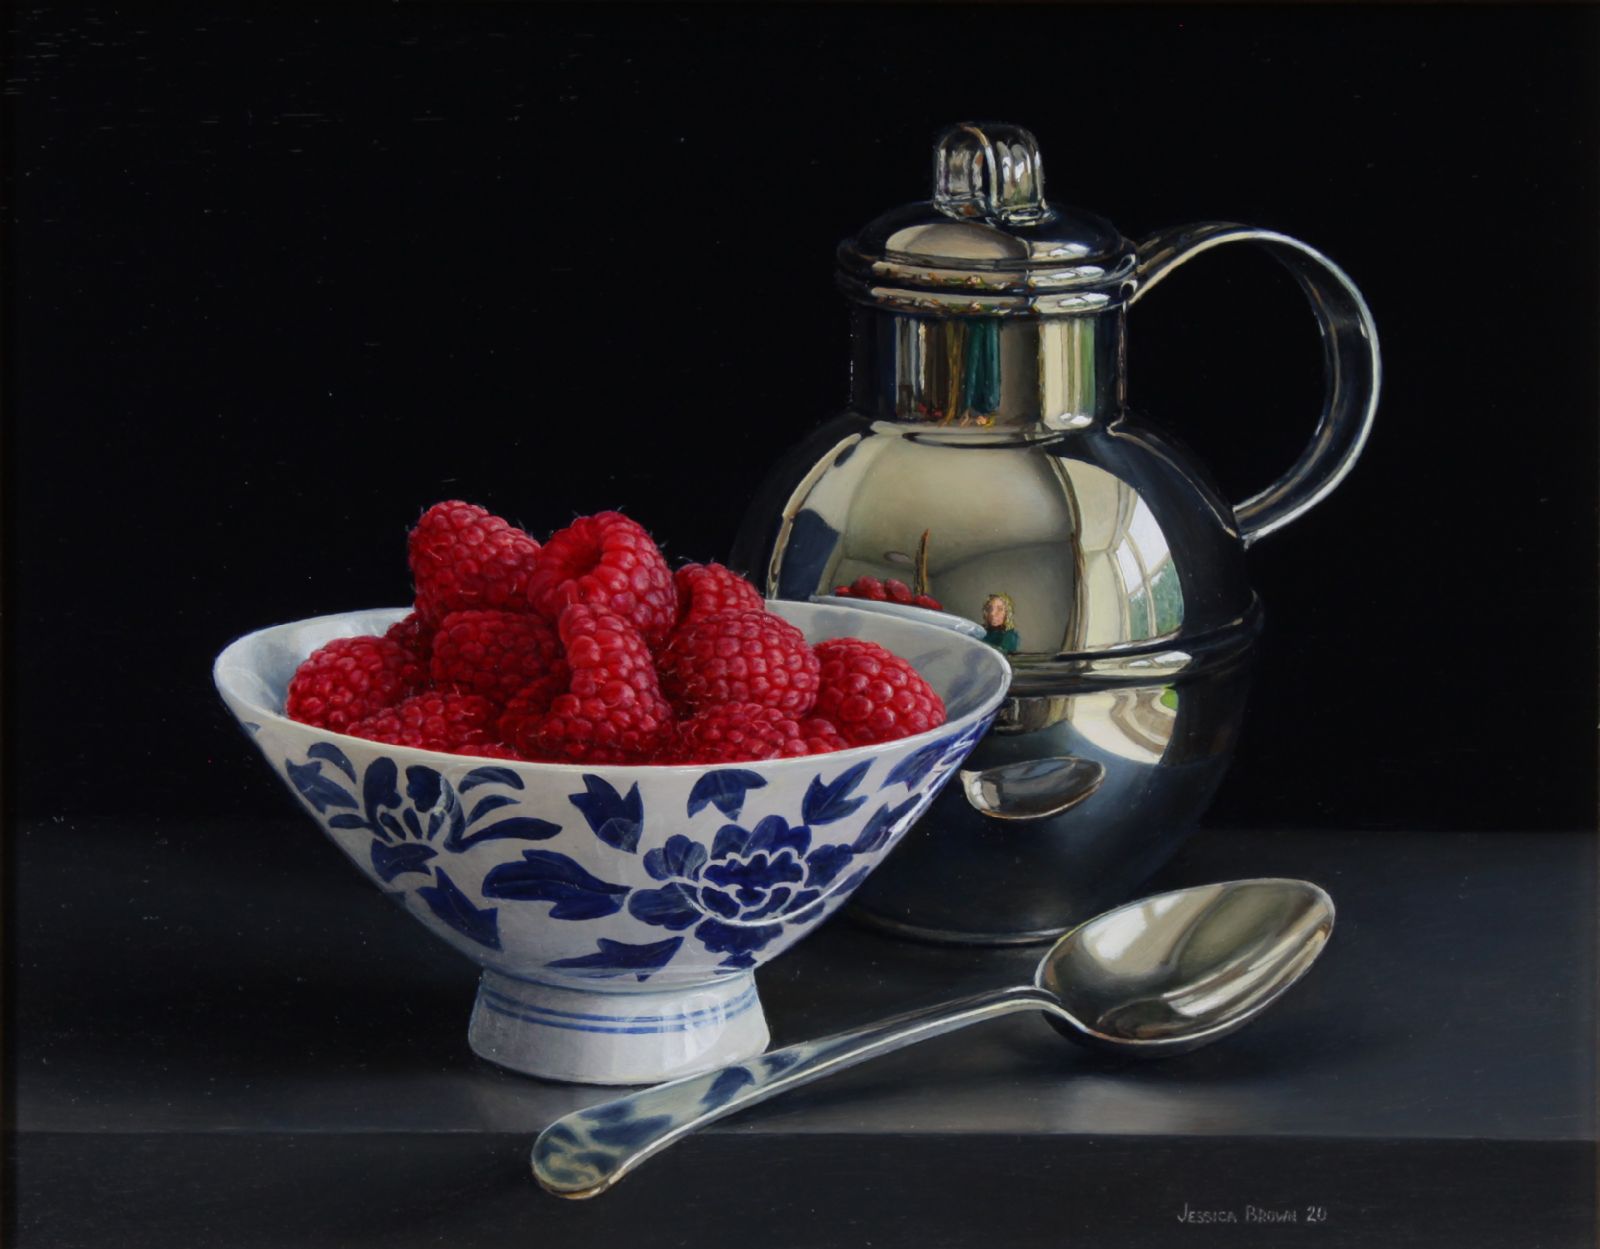 Still Life with Silver Jersey Cream Jug and Raspberries by Jessica Brown